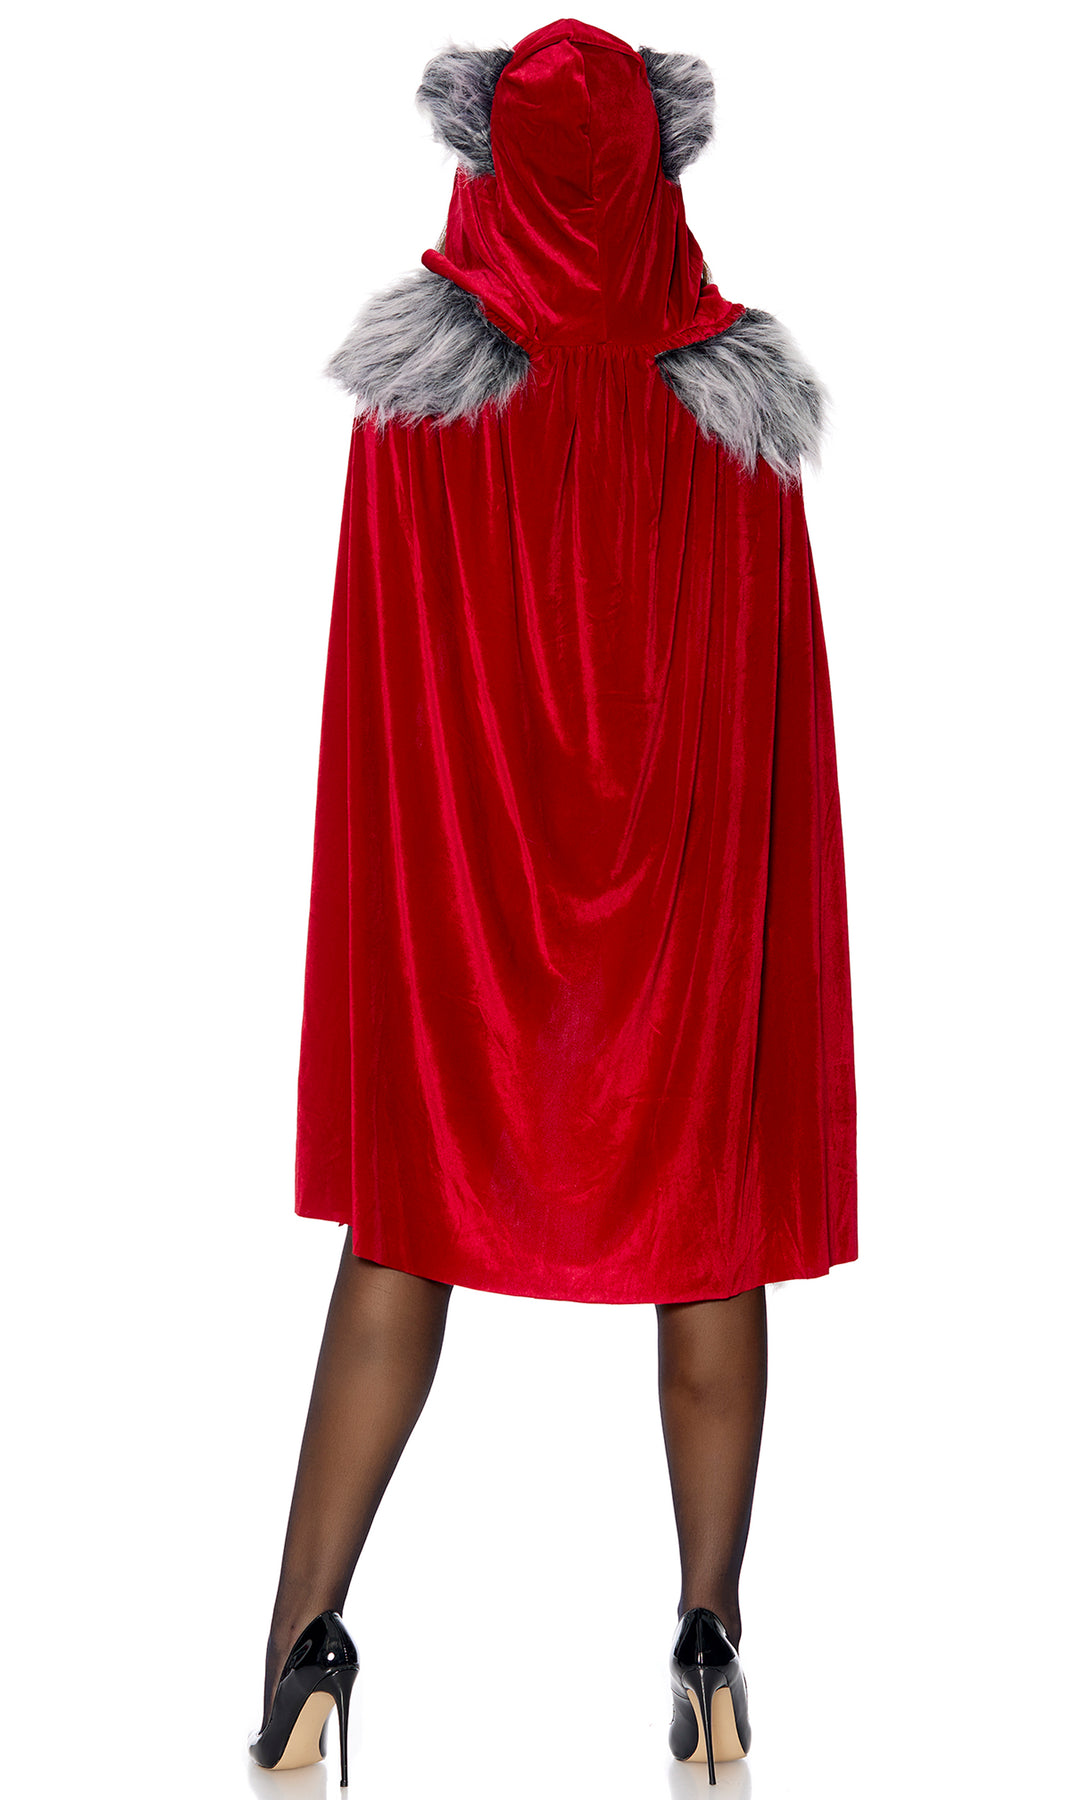 Red Haute Storybook Character Costume